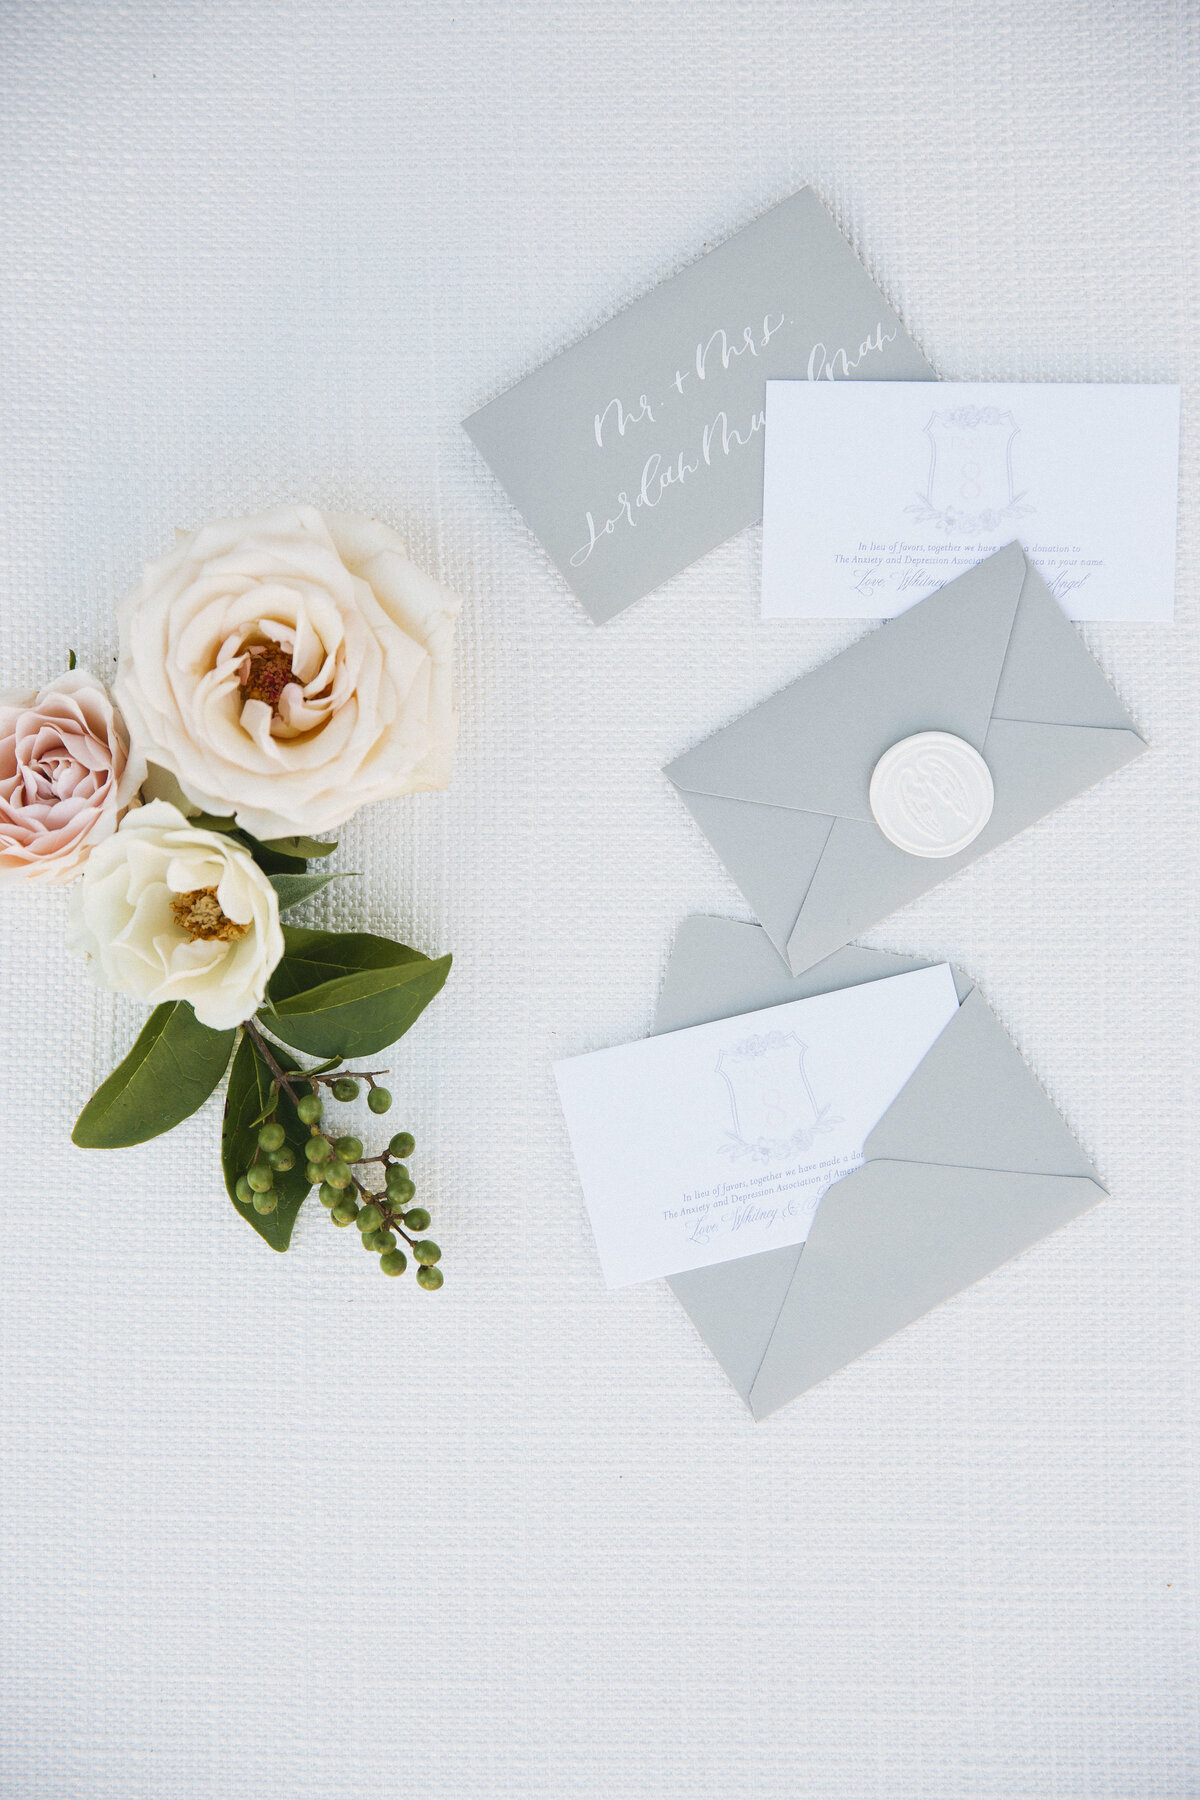 Escort cards with envelopes and wax seals for an escort card display